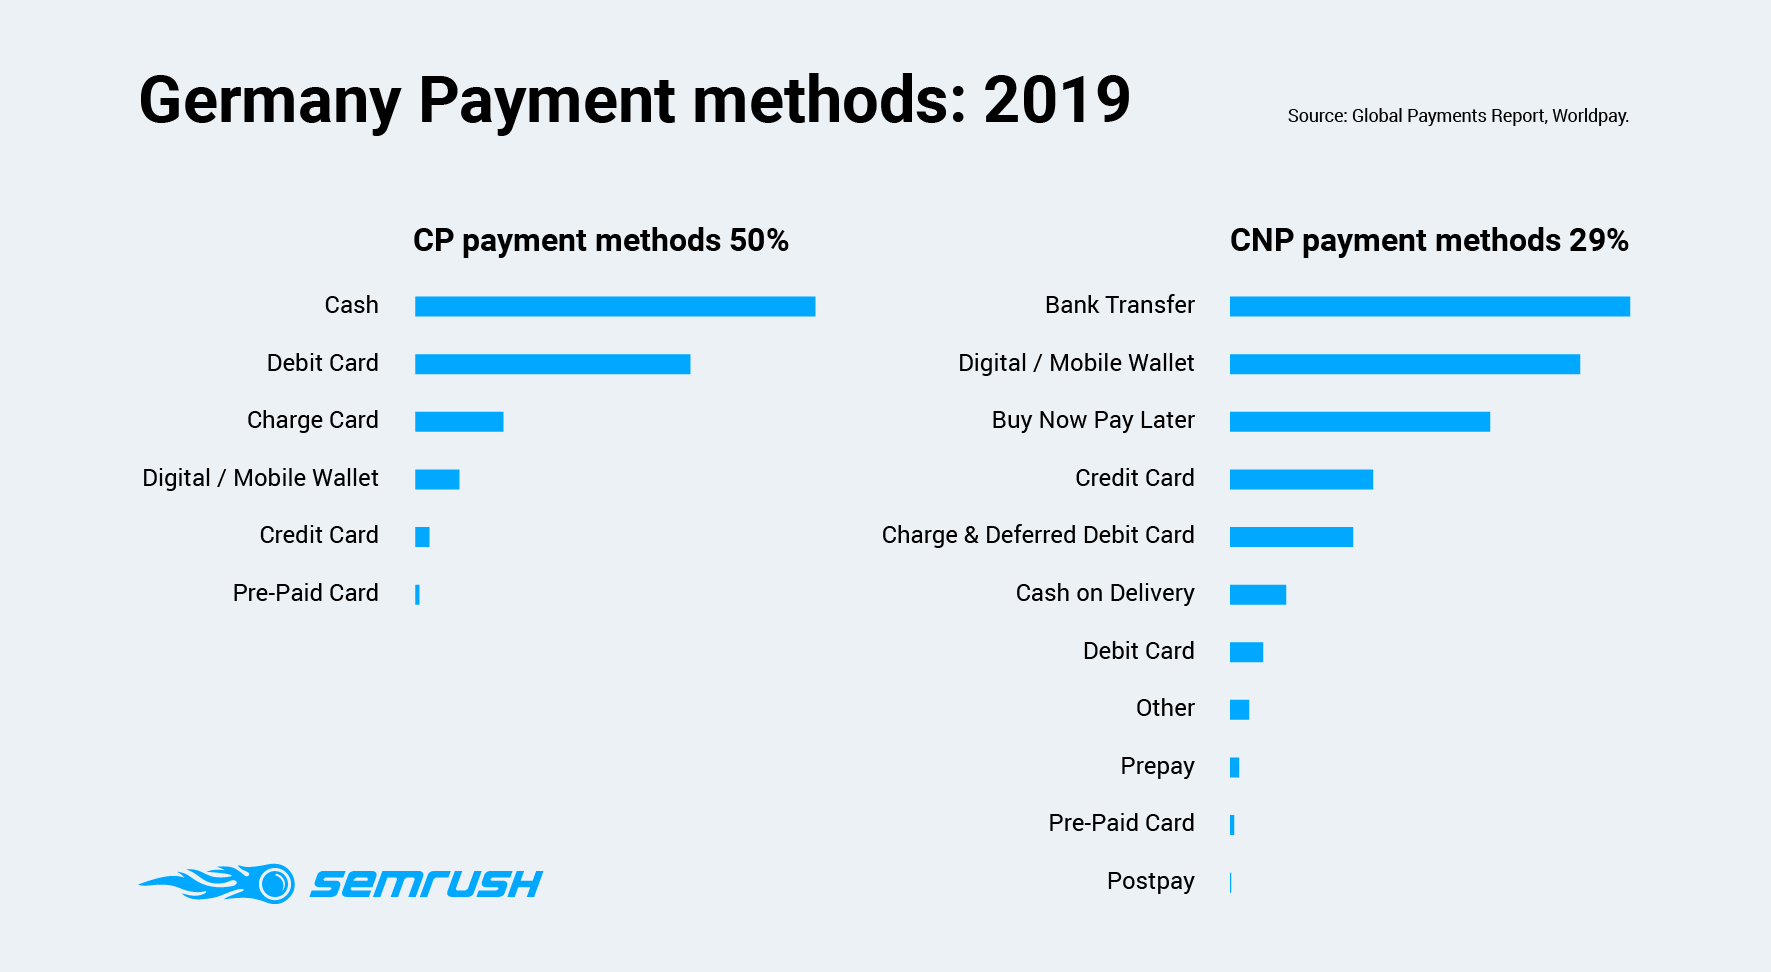 Germany Payment methods